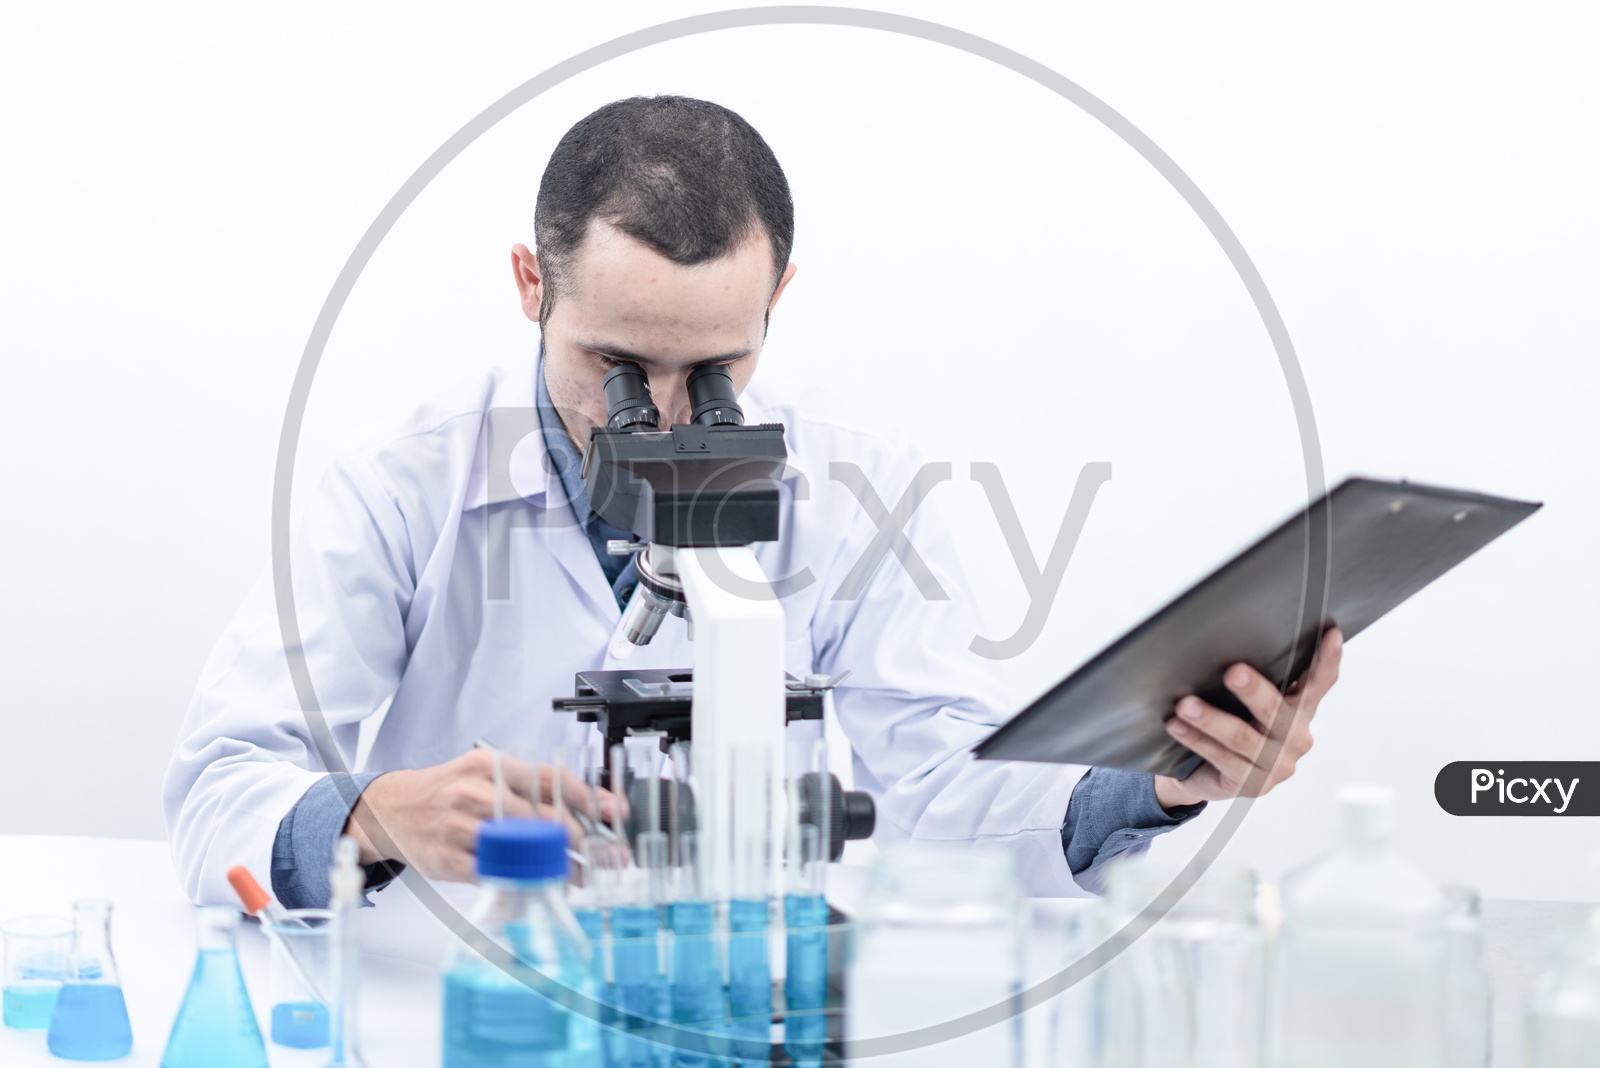 Young Asian Scientist or Medical Student Analyzing Sample through Microscope at Laboratory